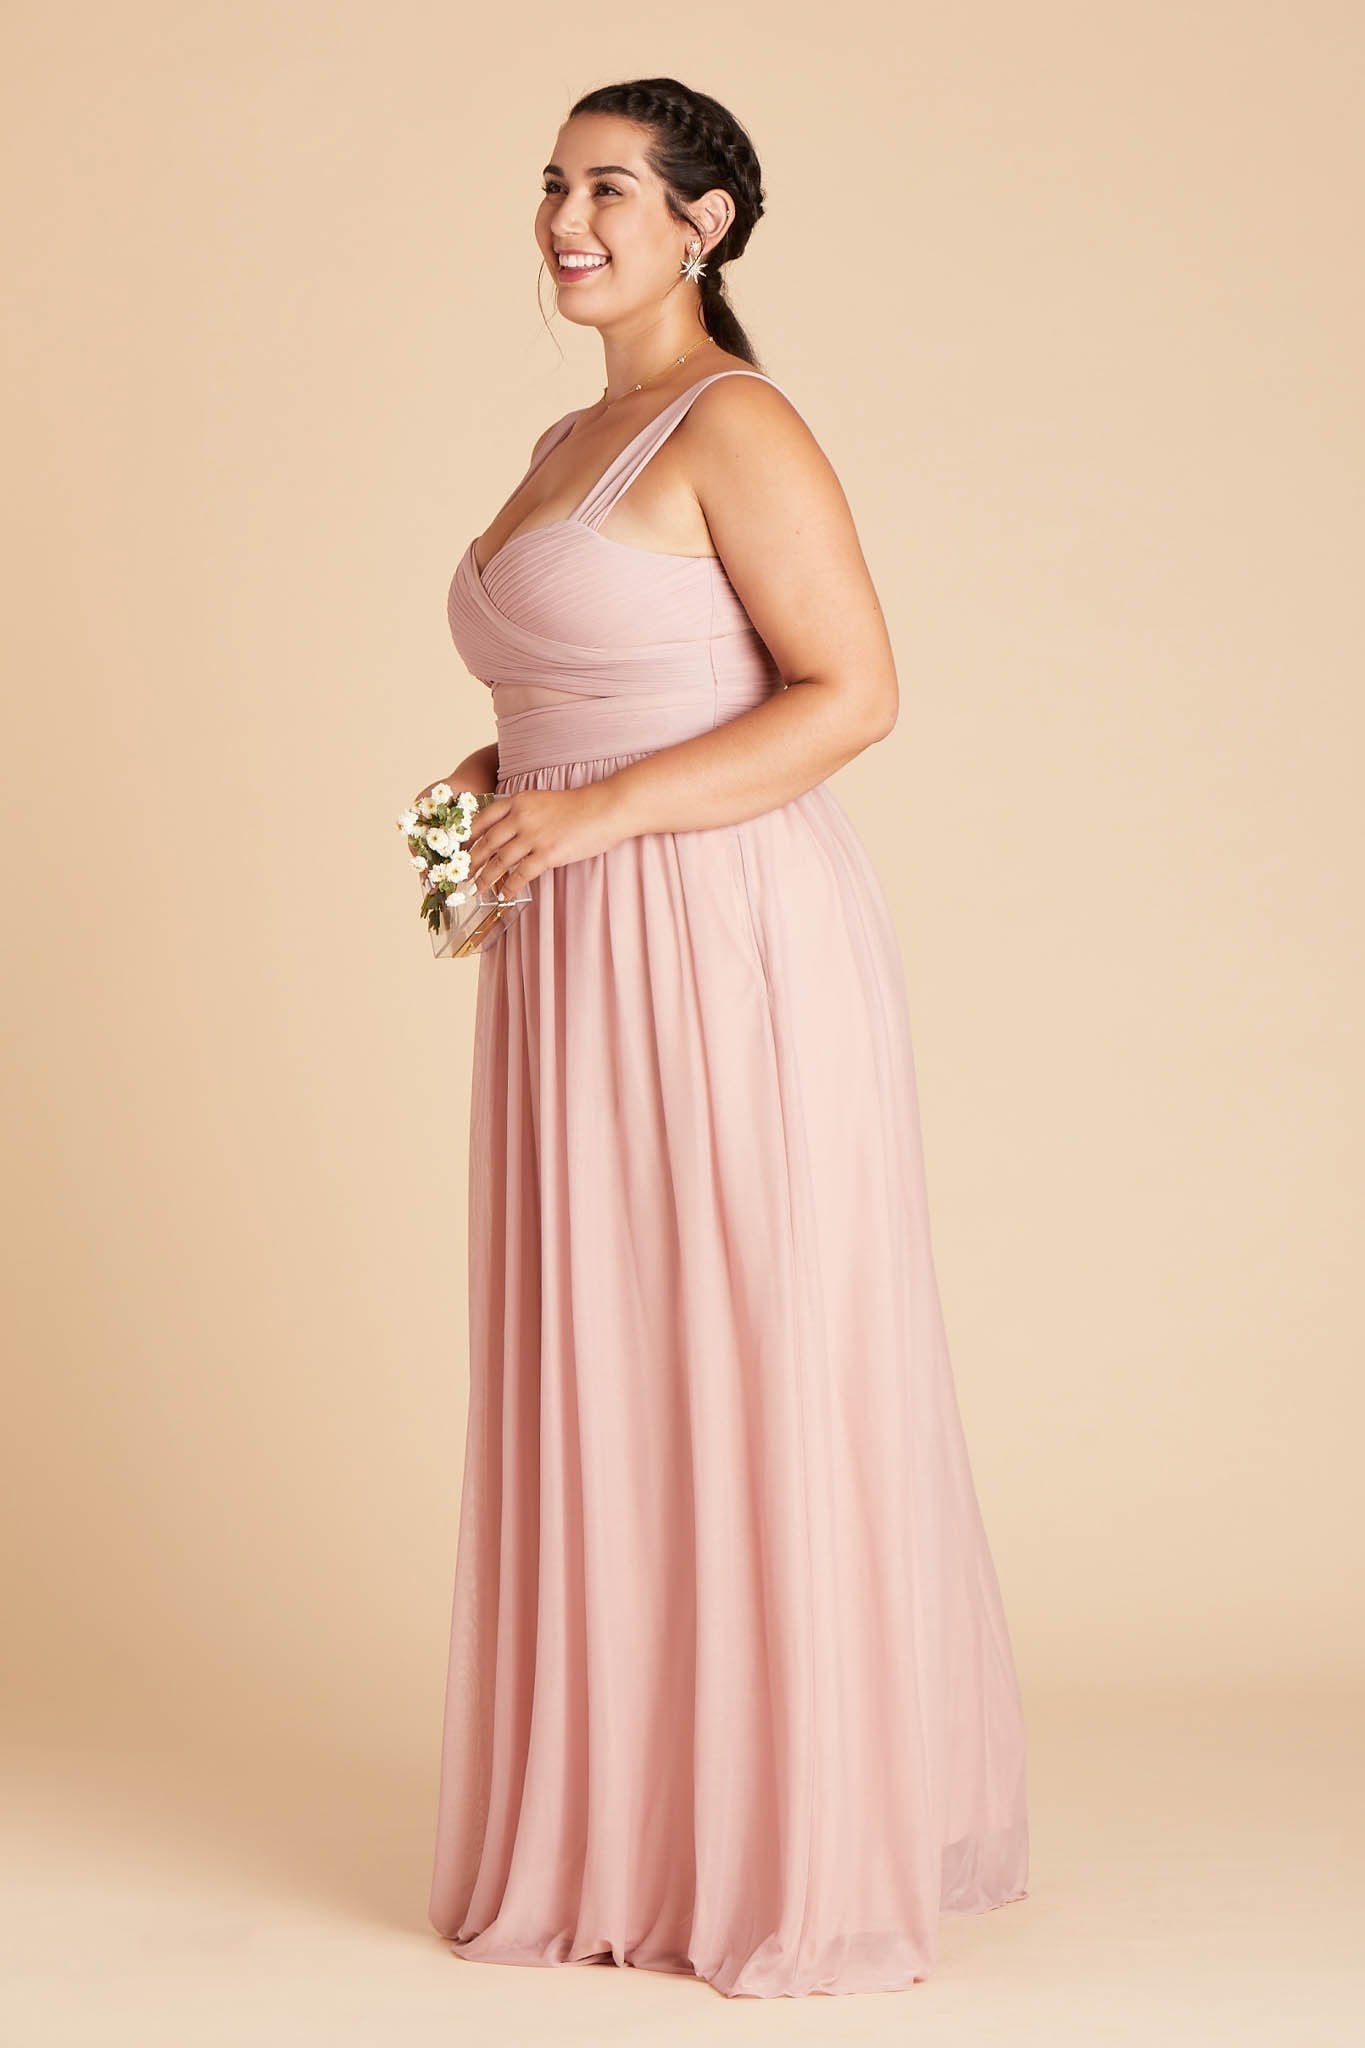 Side view model wearing Elsye Plus Size Bridesmaid Dress in dusty rose mesh paired with the Brighton Pearl Necklace by Birdy Grey.